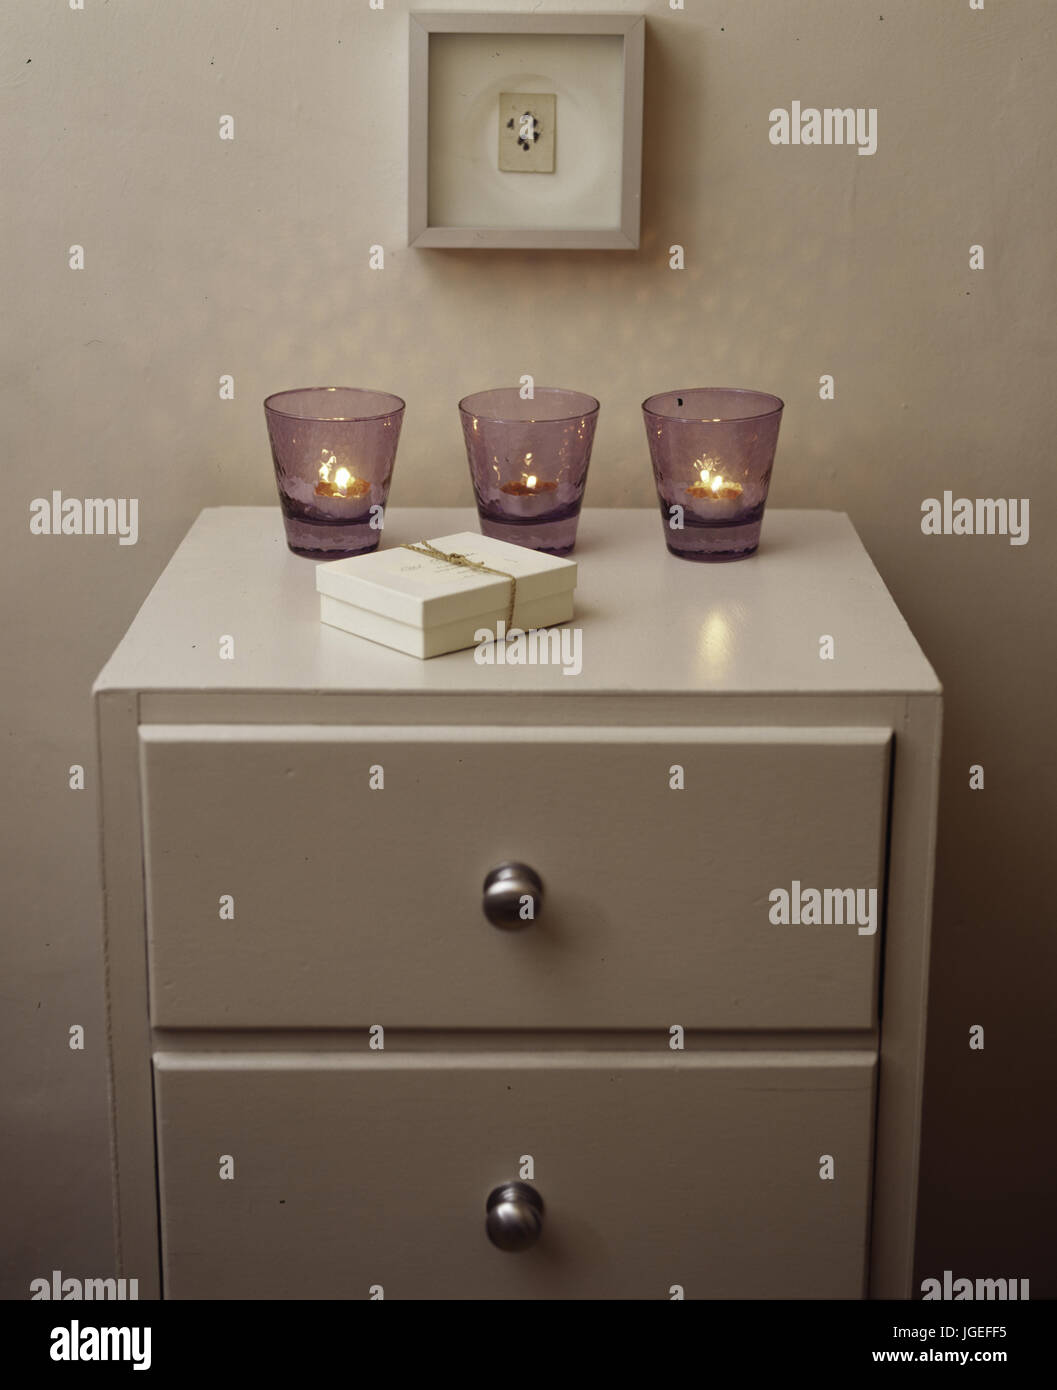 Small chest of drawers with three nightlights in glasses Stock Photo